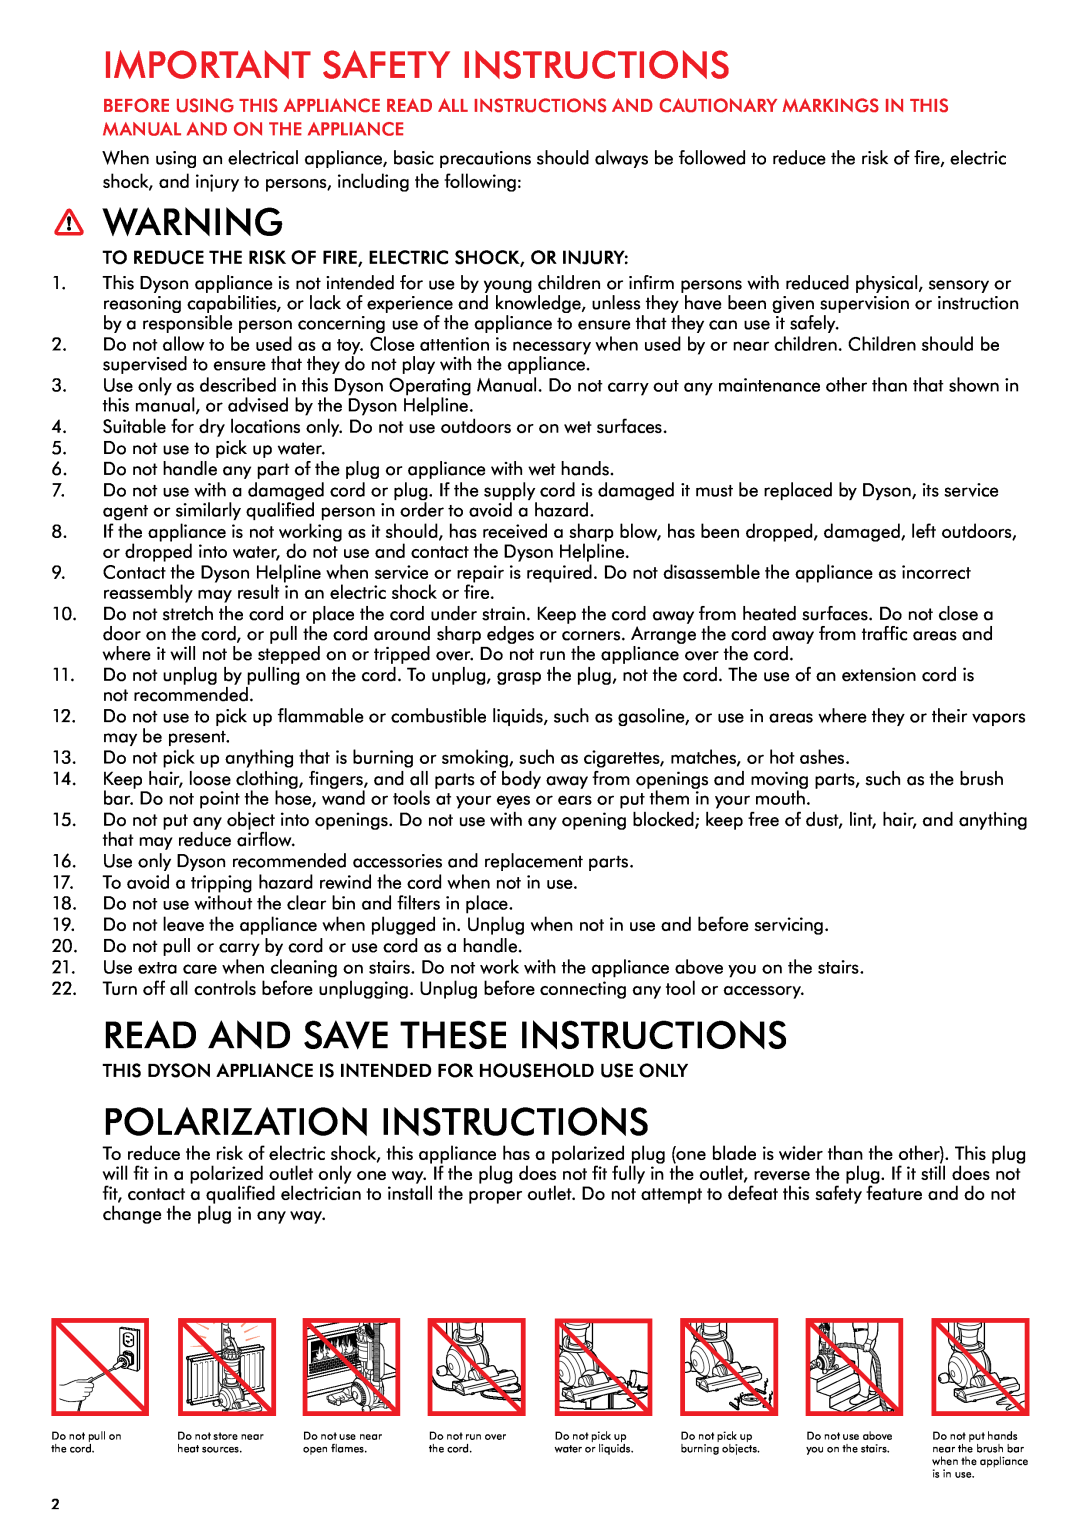 Dyson DC65 warranty Important Safety Instructions, Read And Save These Instructions, Polarization Instructions 